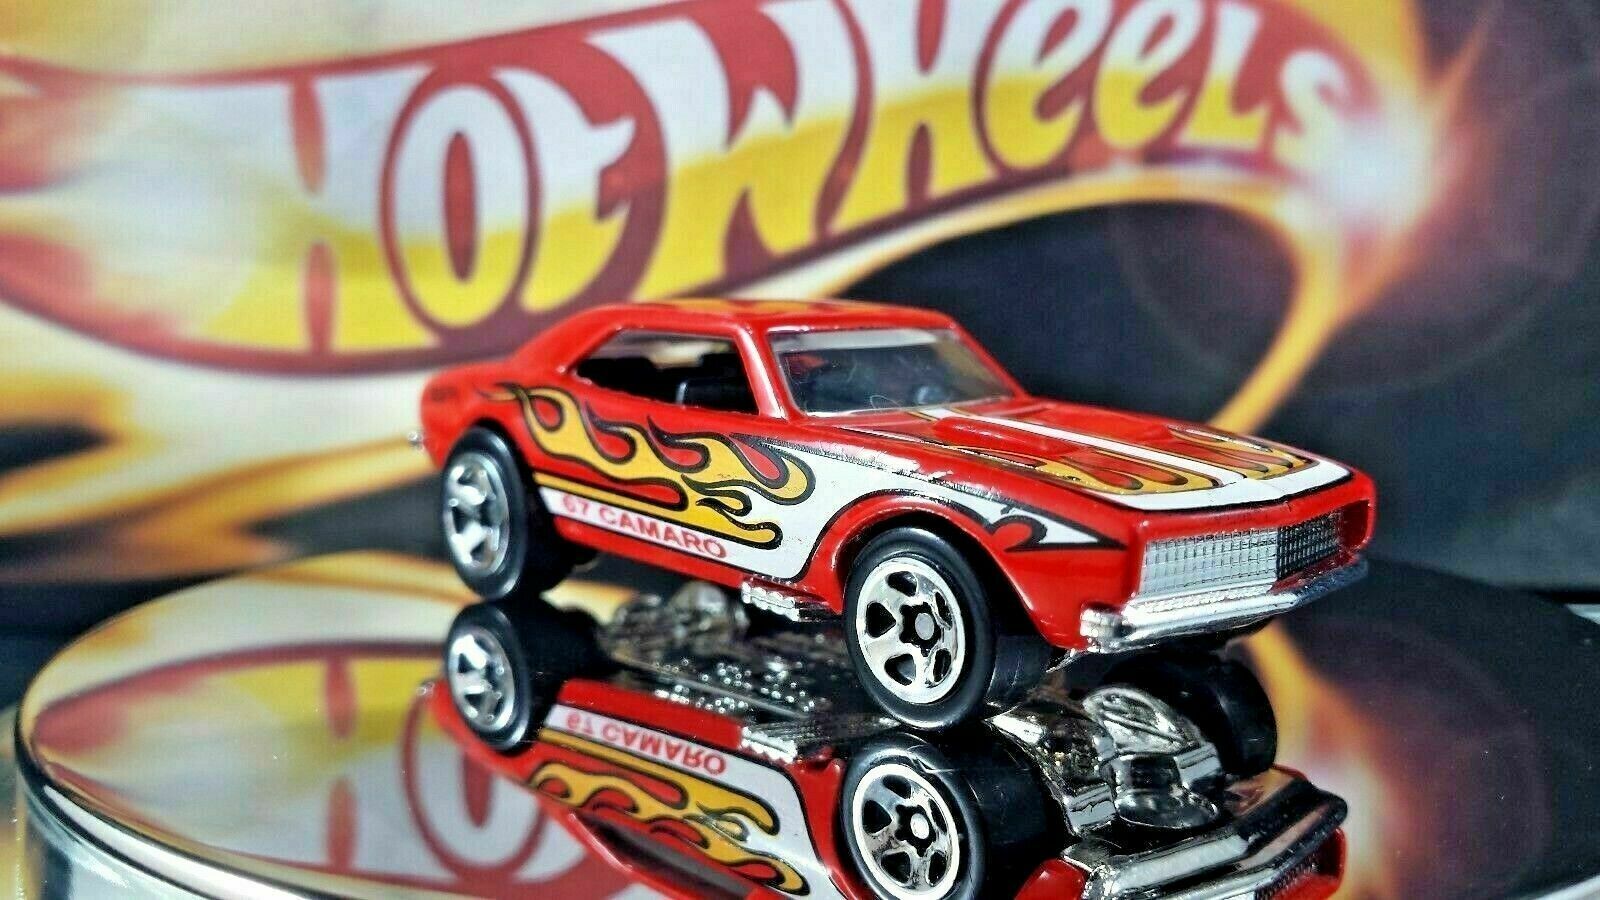 HOT WHEELS 1967 Chevrolet Camaro Red with Flames Loose MINT